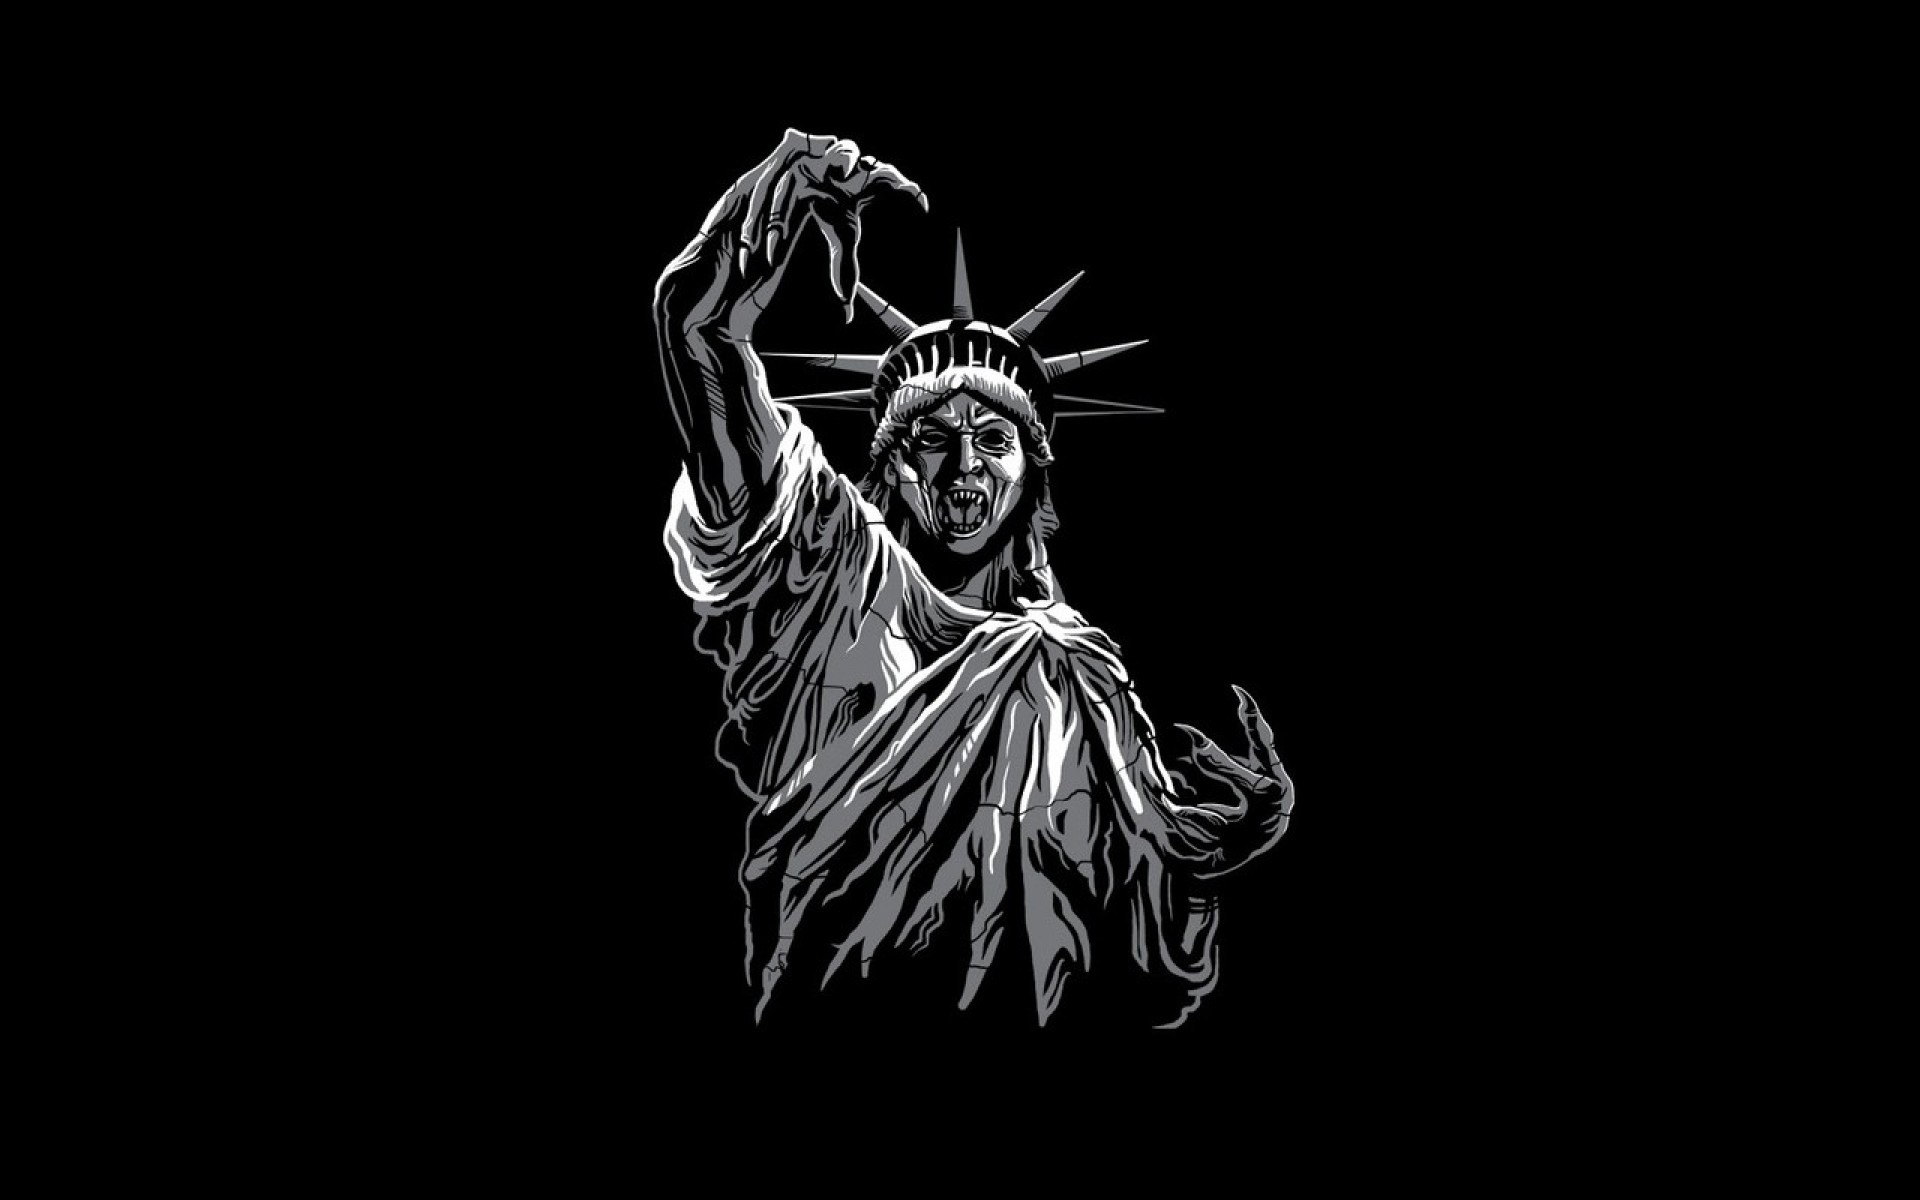 1920x1200 statue of liberty statues doctor who black background weeping angel  1280x800 wallpaper Wallpaper HD